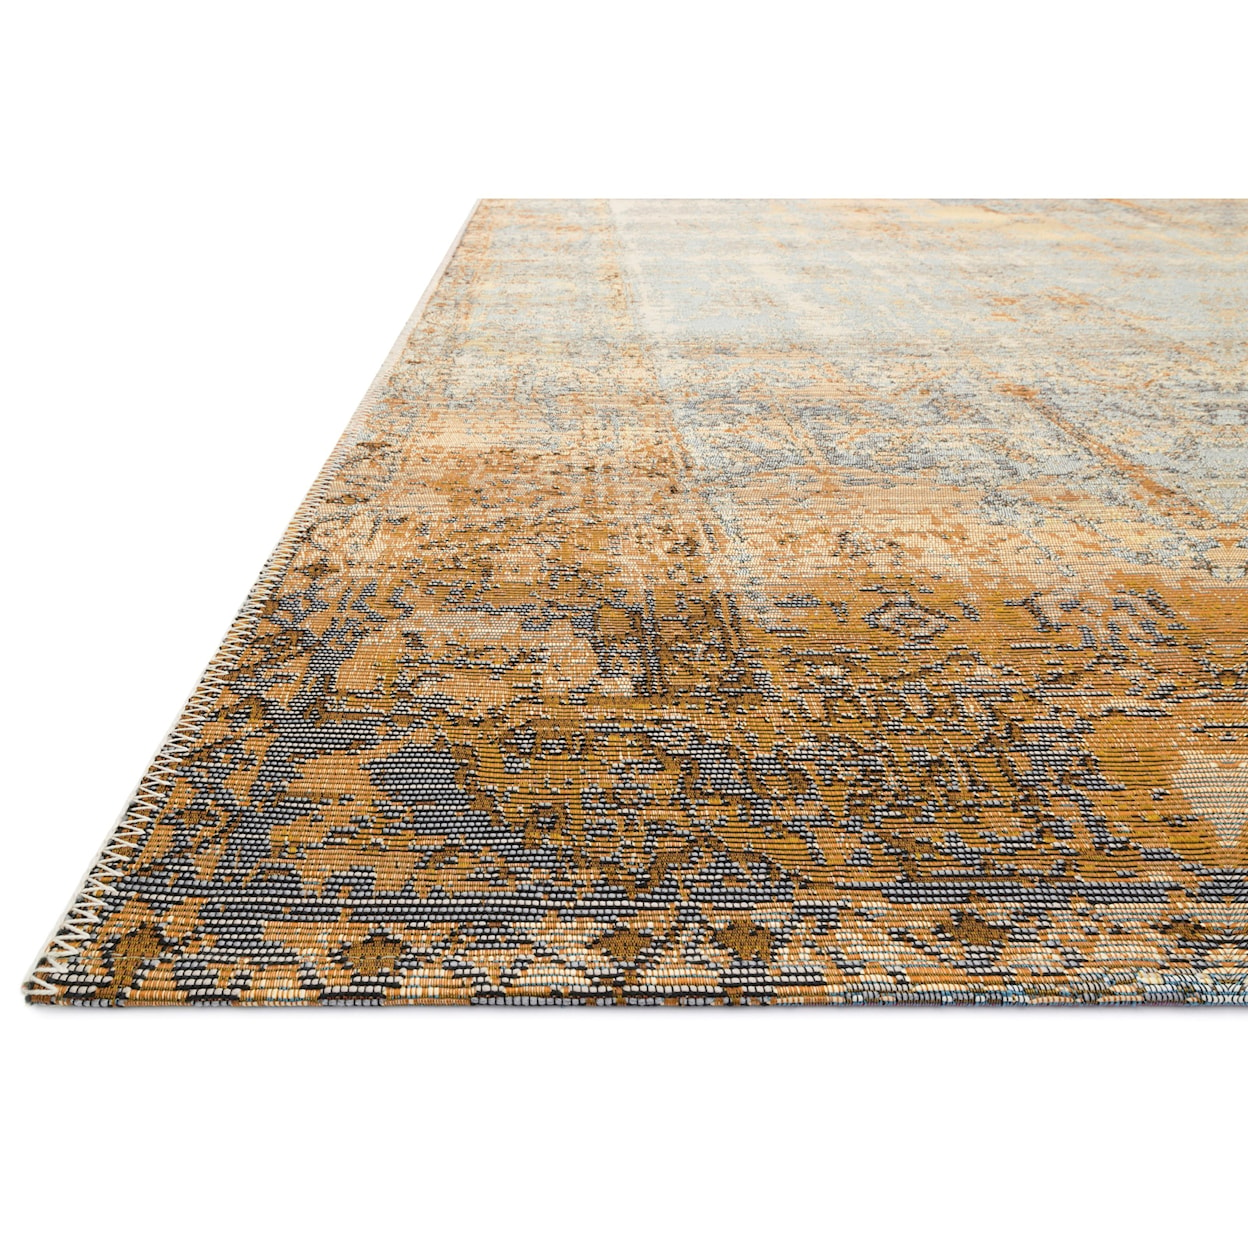 Loloi Rugs Mika 1'6" x 1'6"  Ant. Ivory / Copper Rug